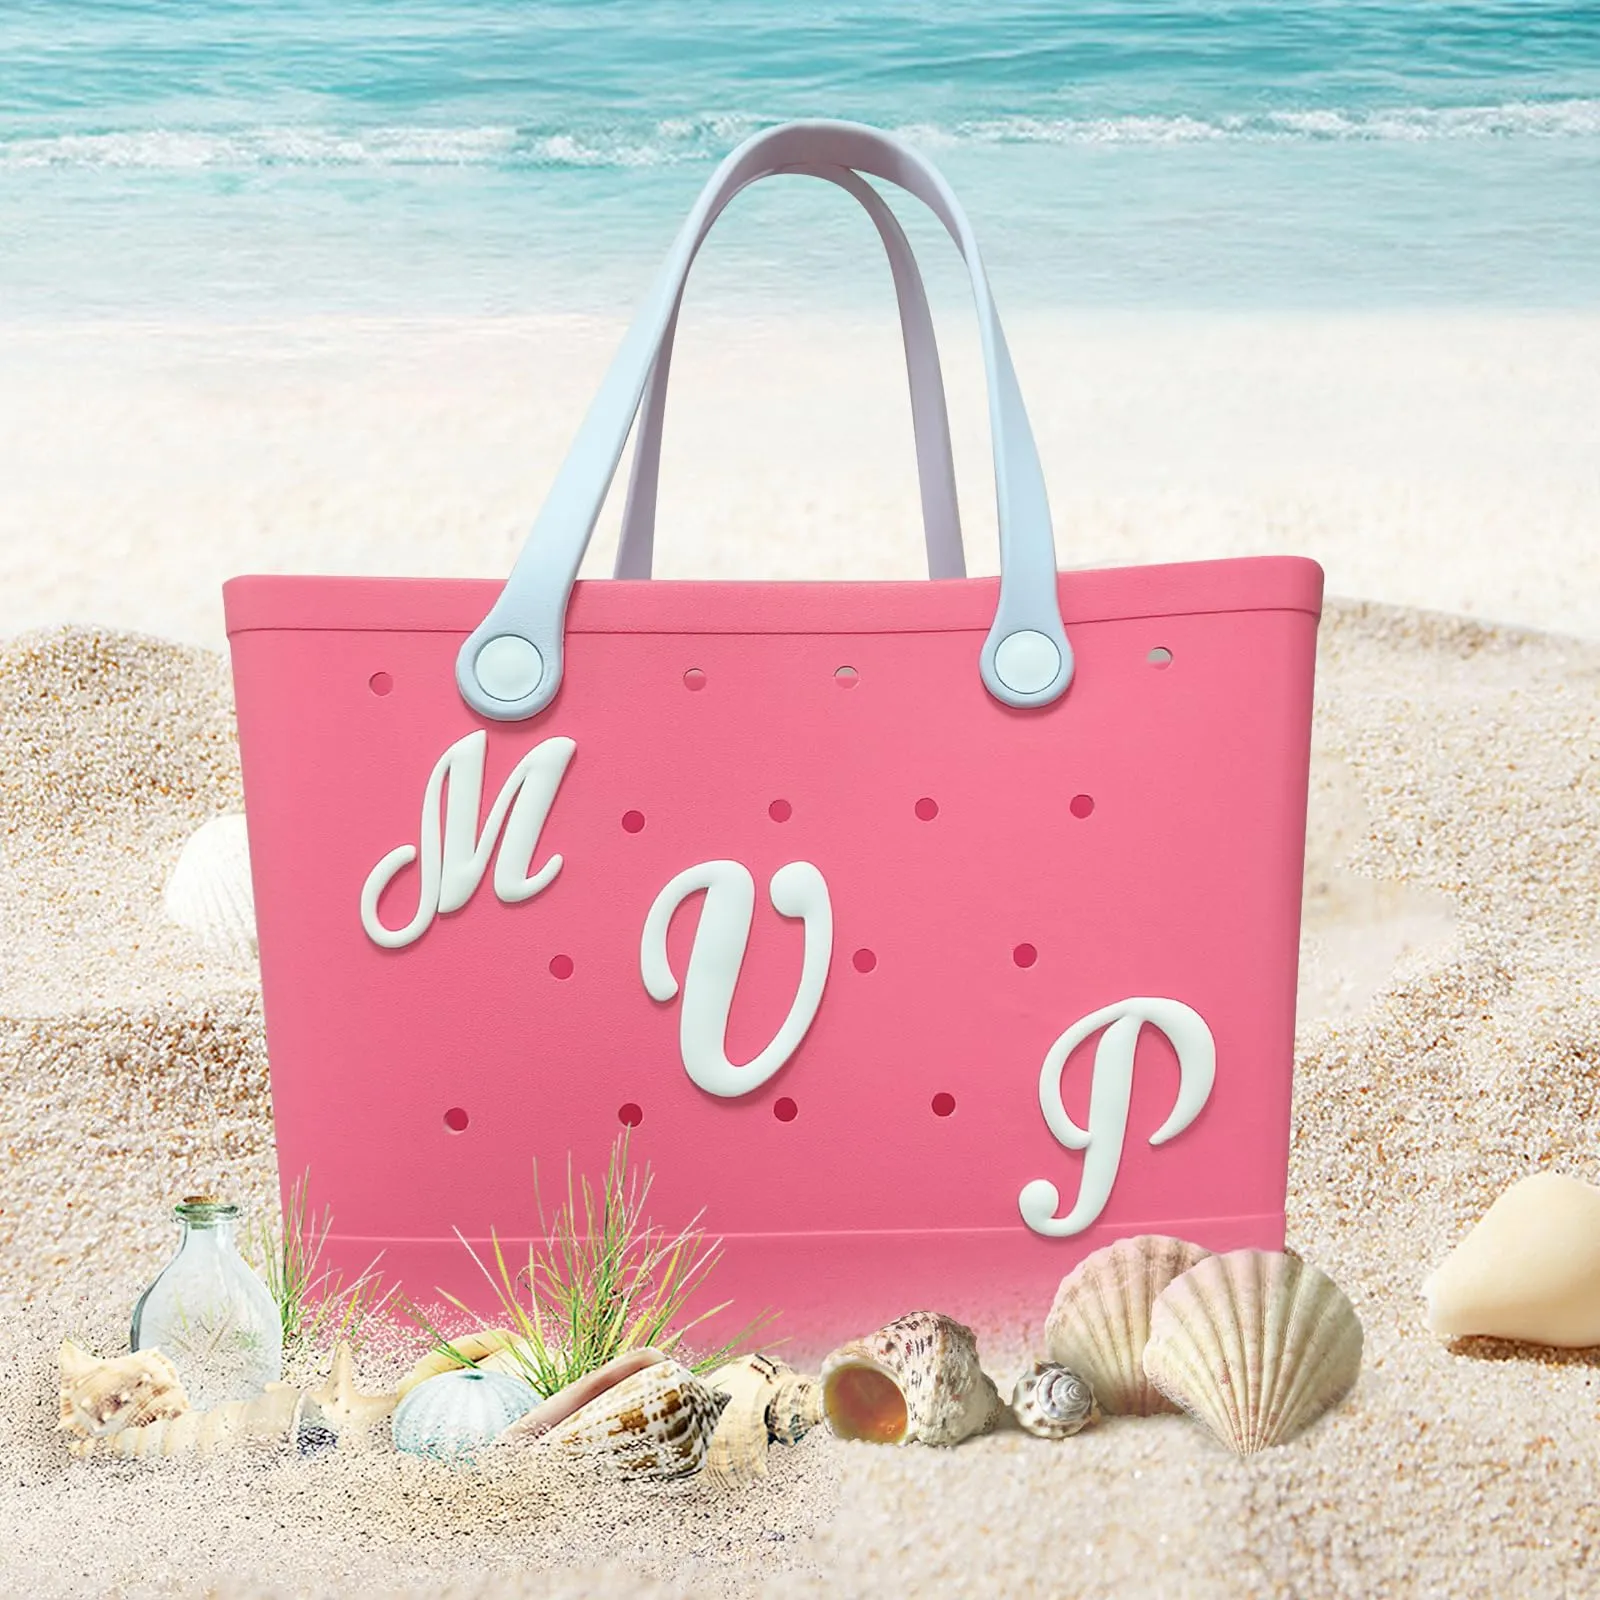 bag charms compatible with bogg bag accessories insert decorative alphabet lettering for bogg bag personalize your beach tote rubber beach bag accessories with alphabet letters f